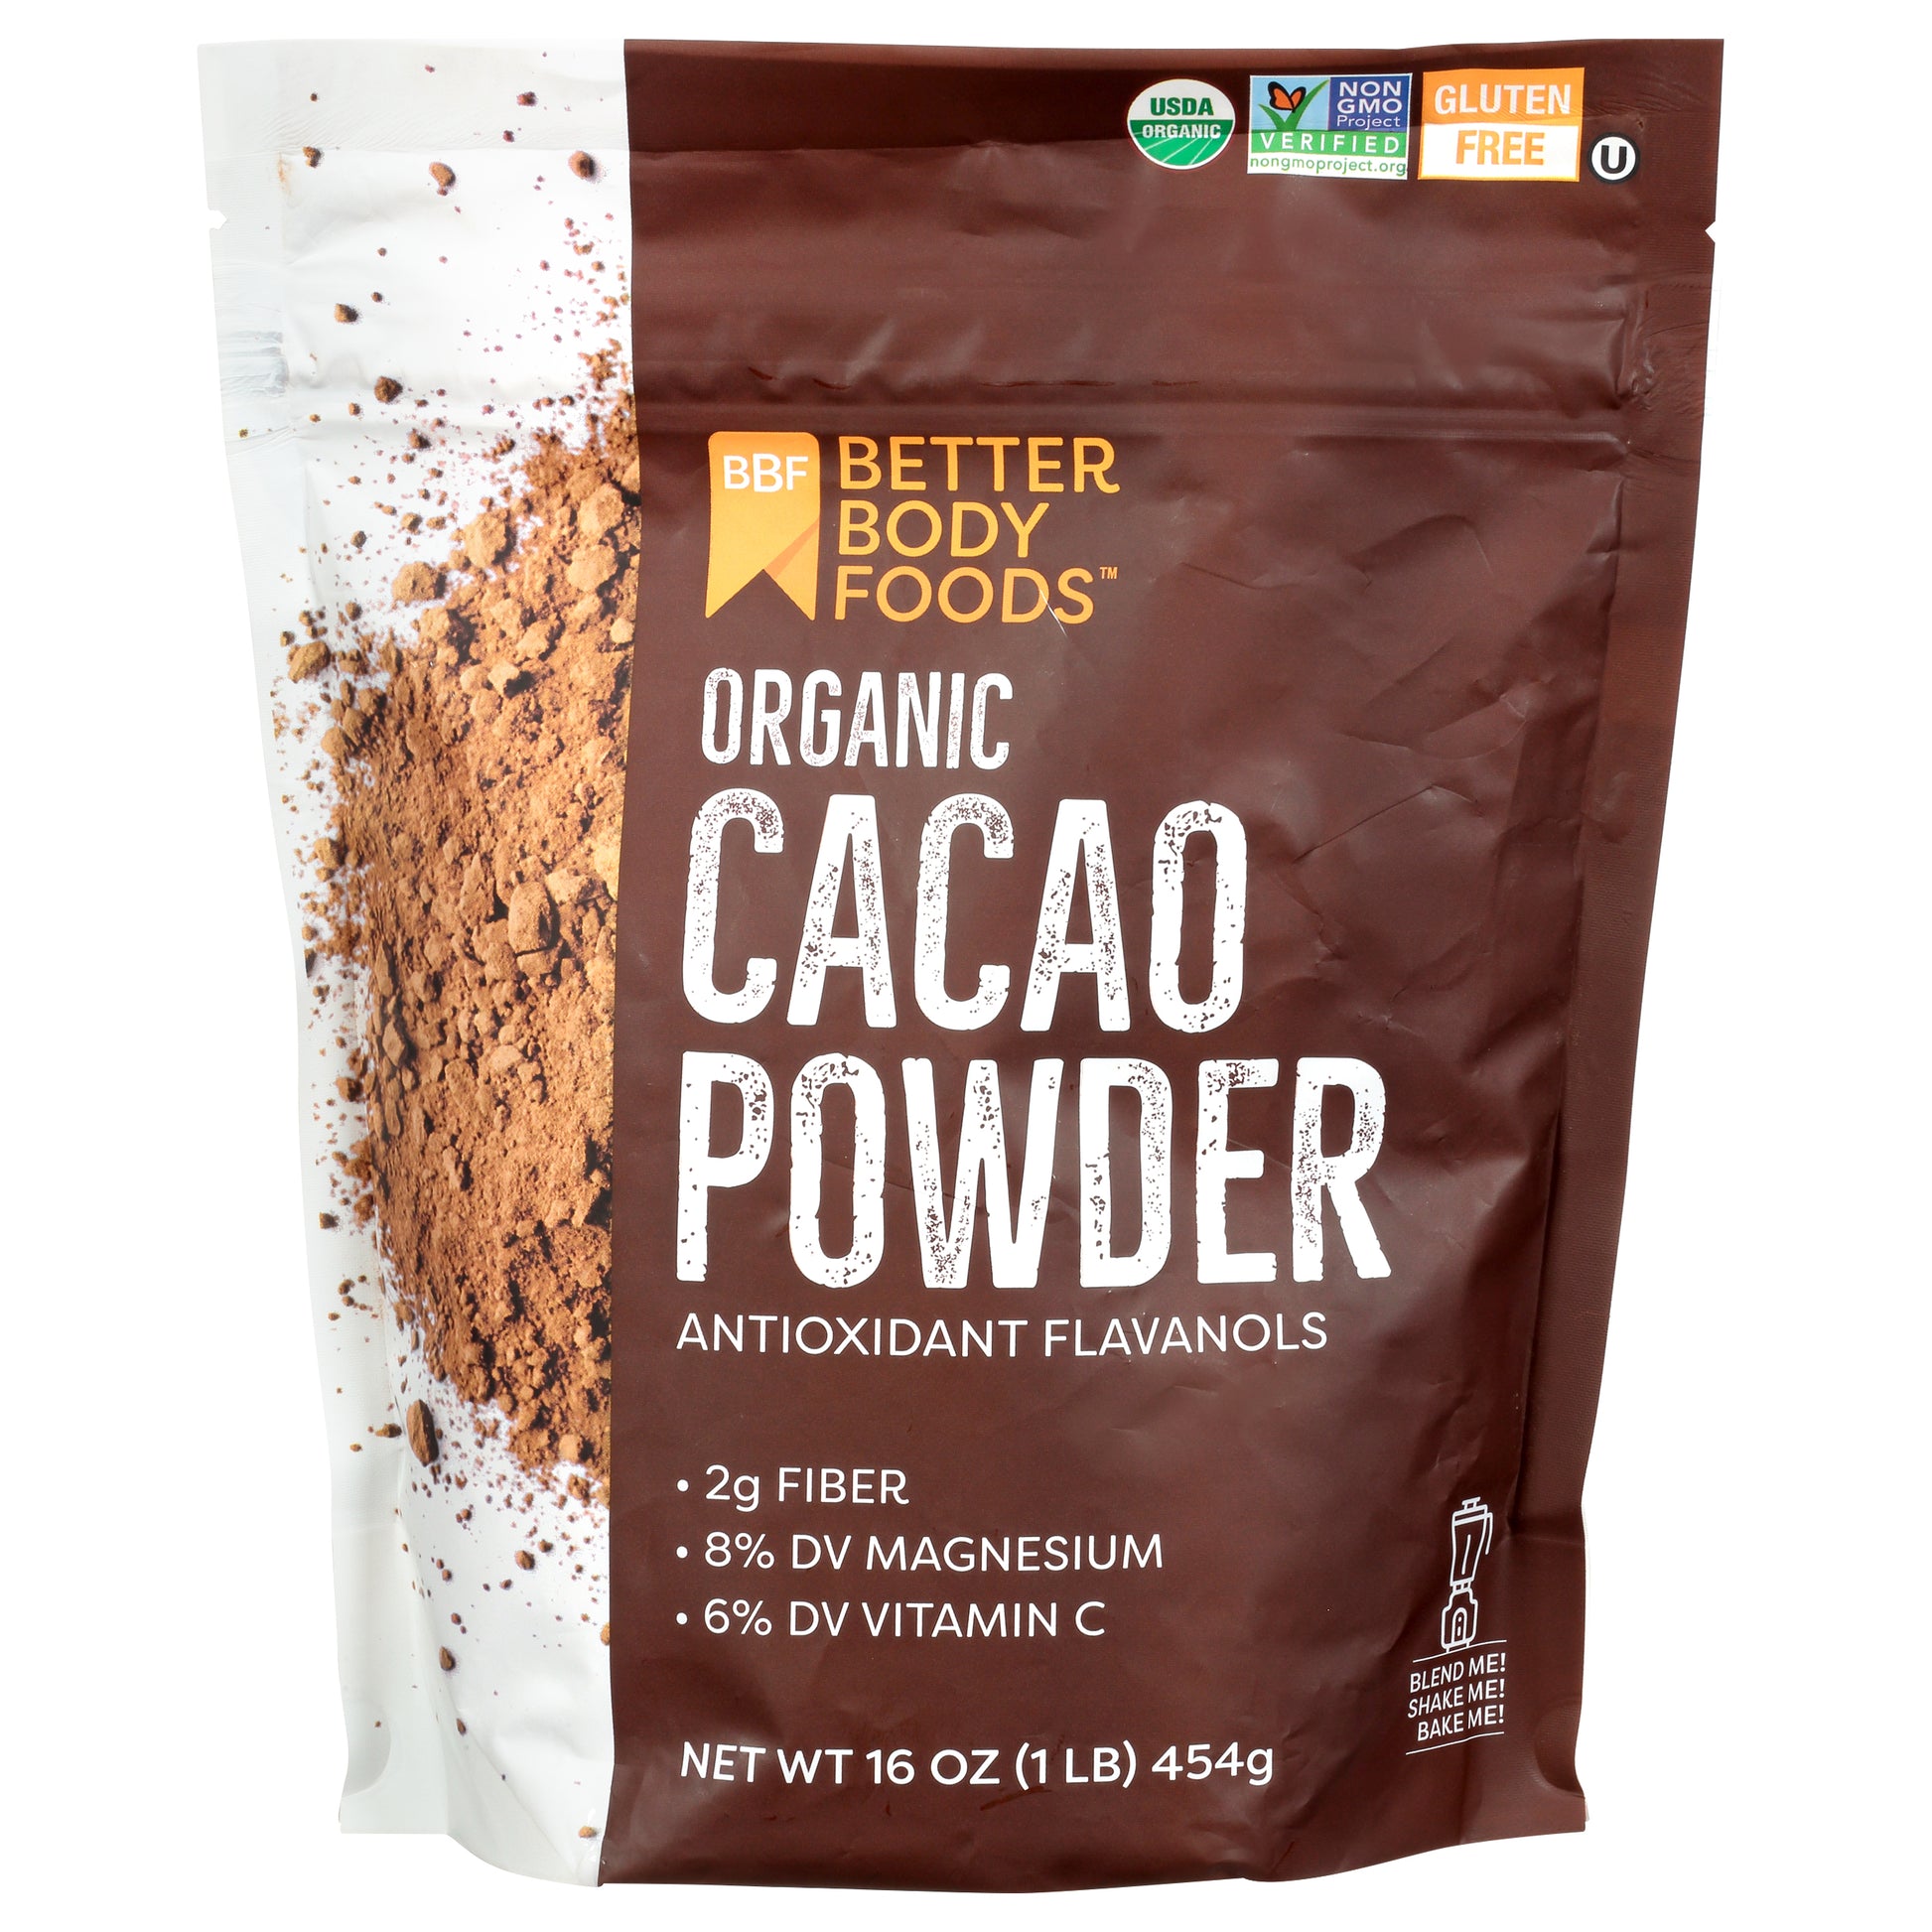 Betterbody Powder Cacao Organic 16 oz (Pack Of 5)